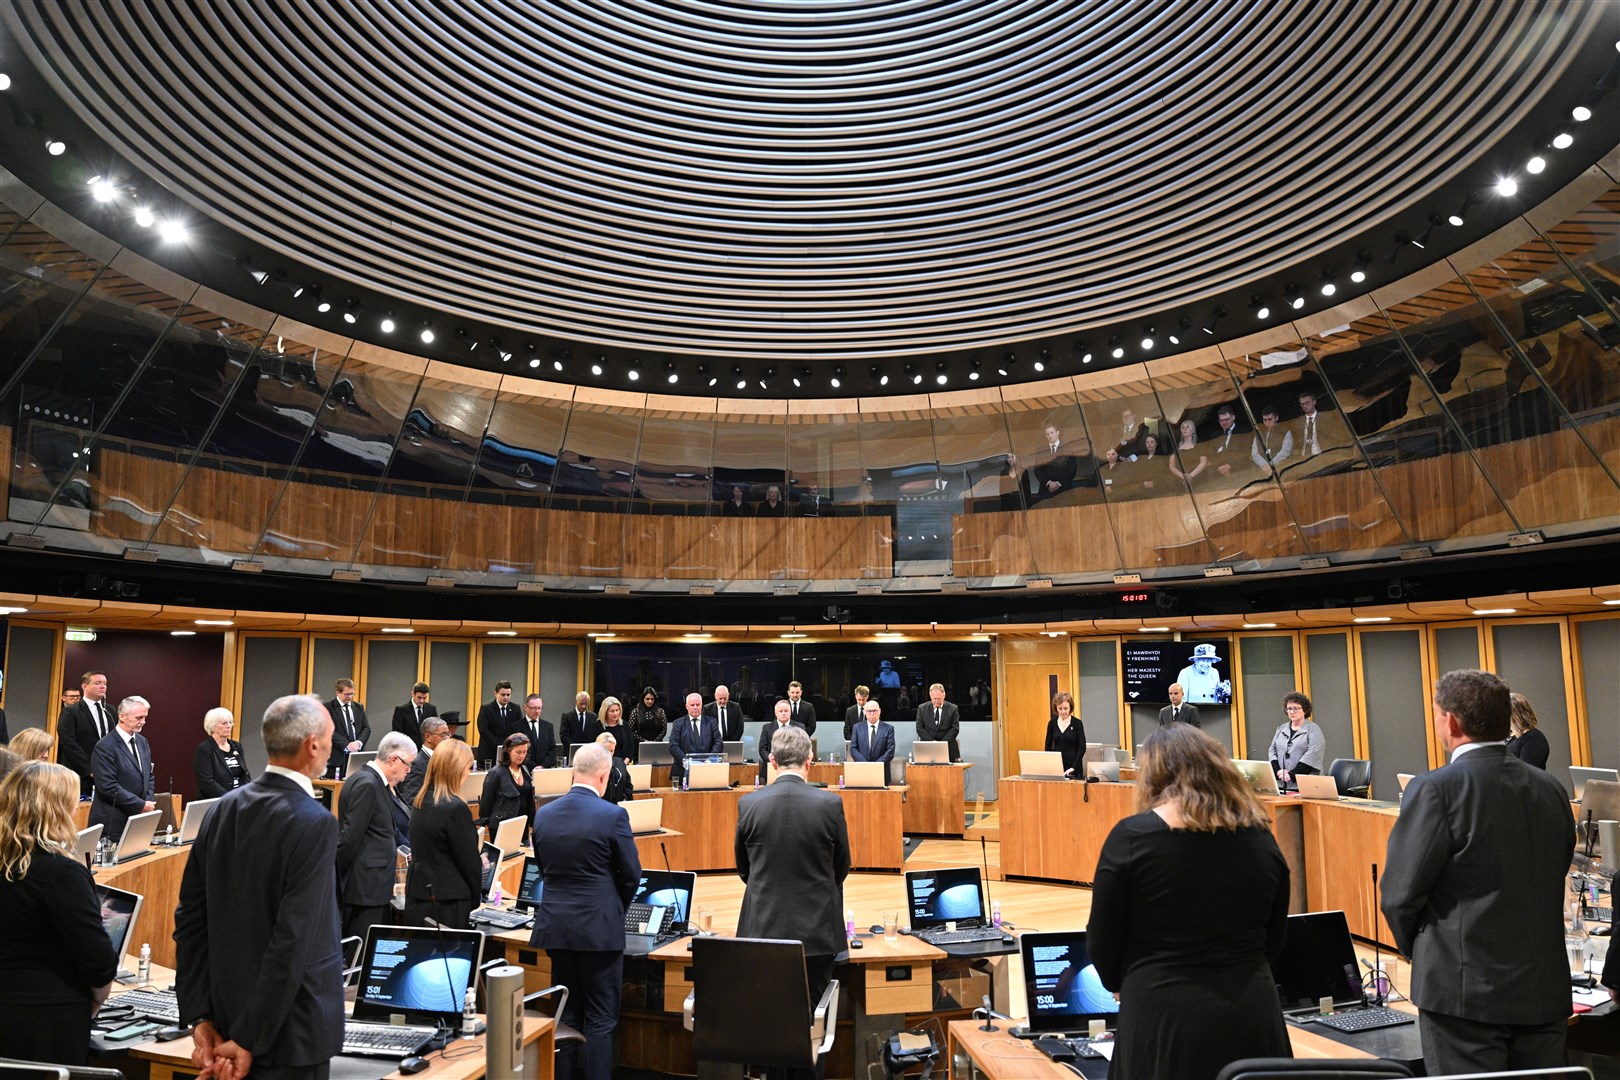 The Senedd is recalled to pay tribute to Her Majesty Queen Elizabeth II (Matthew Horwood/The Welsh Parliament)